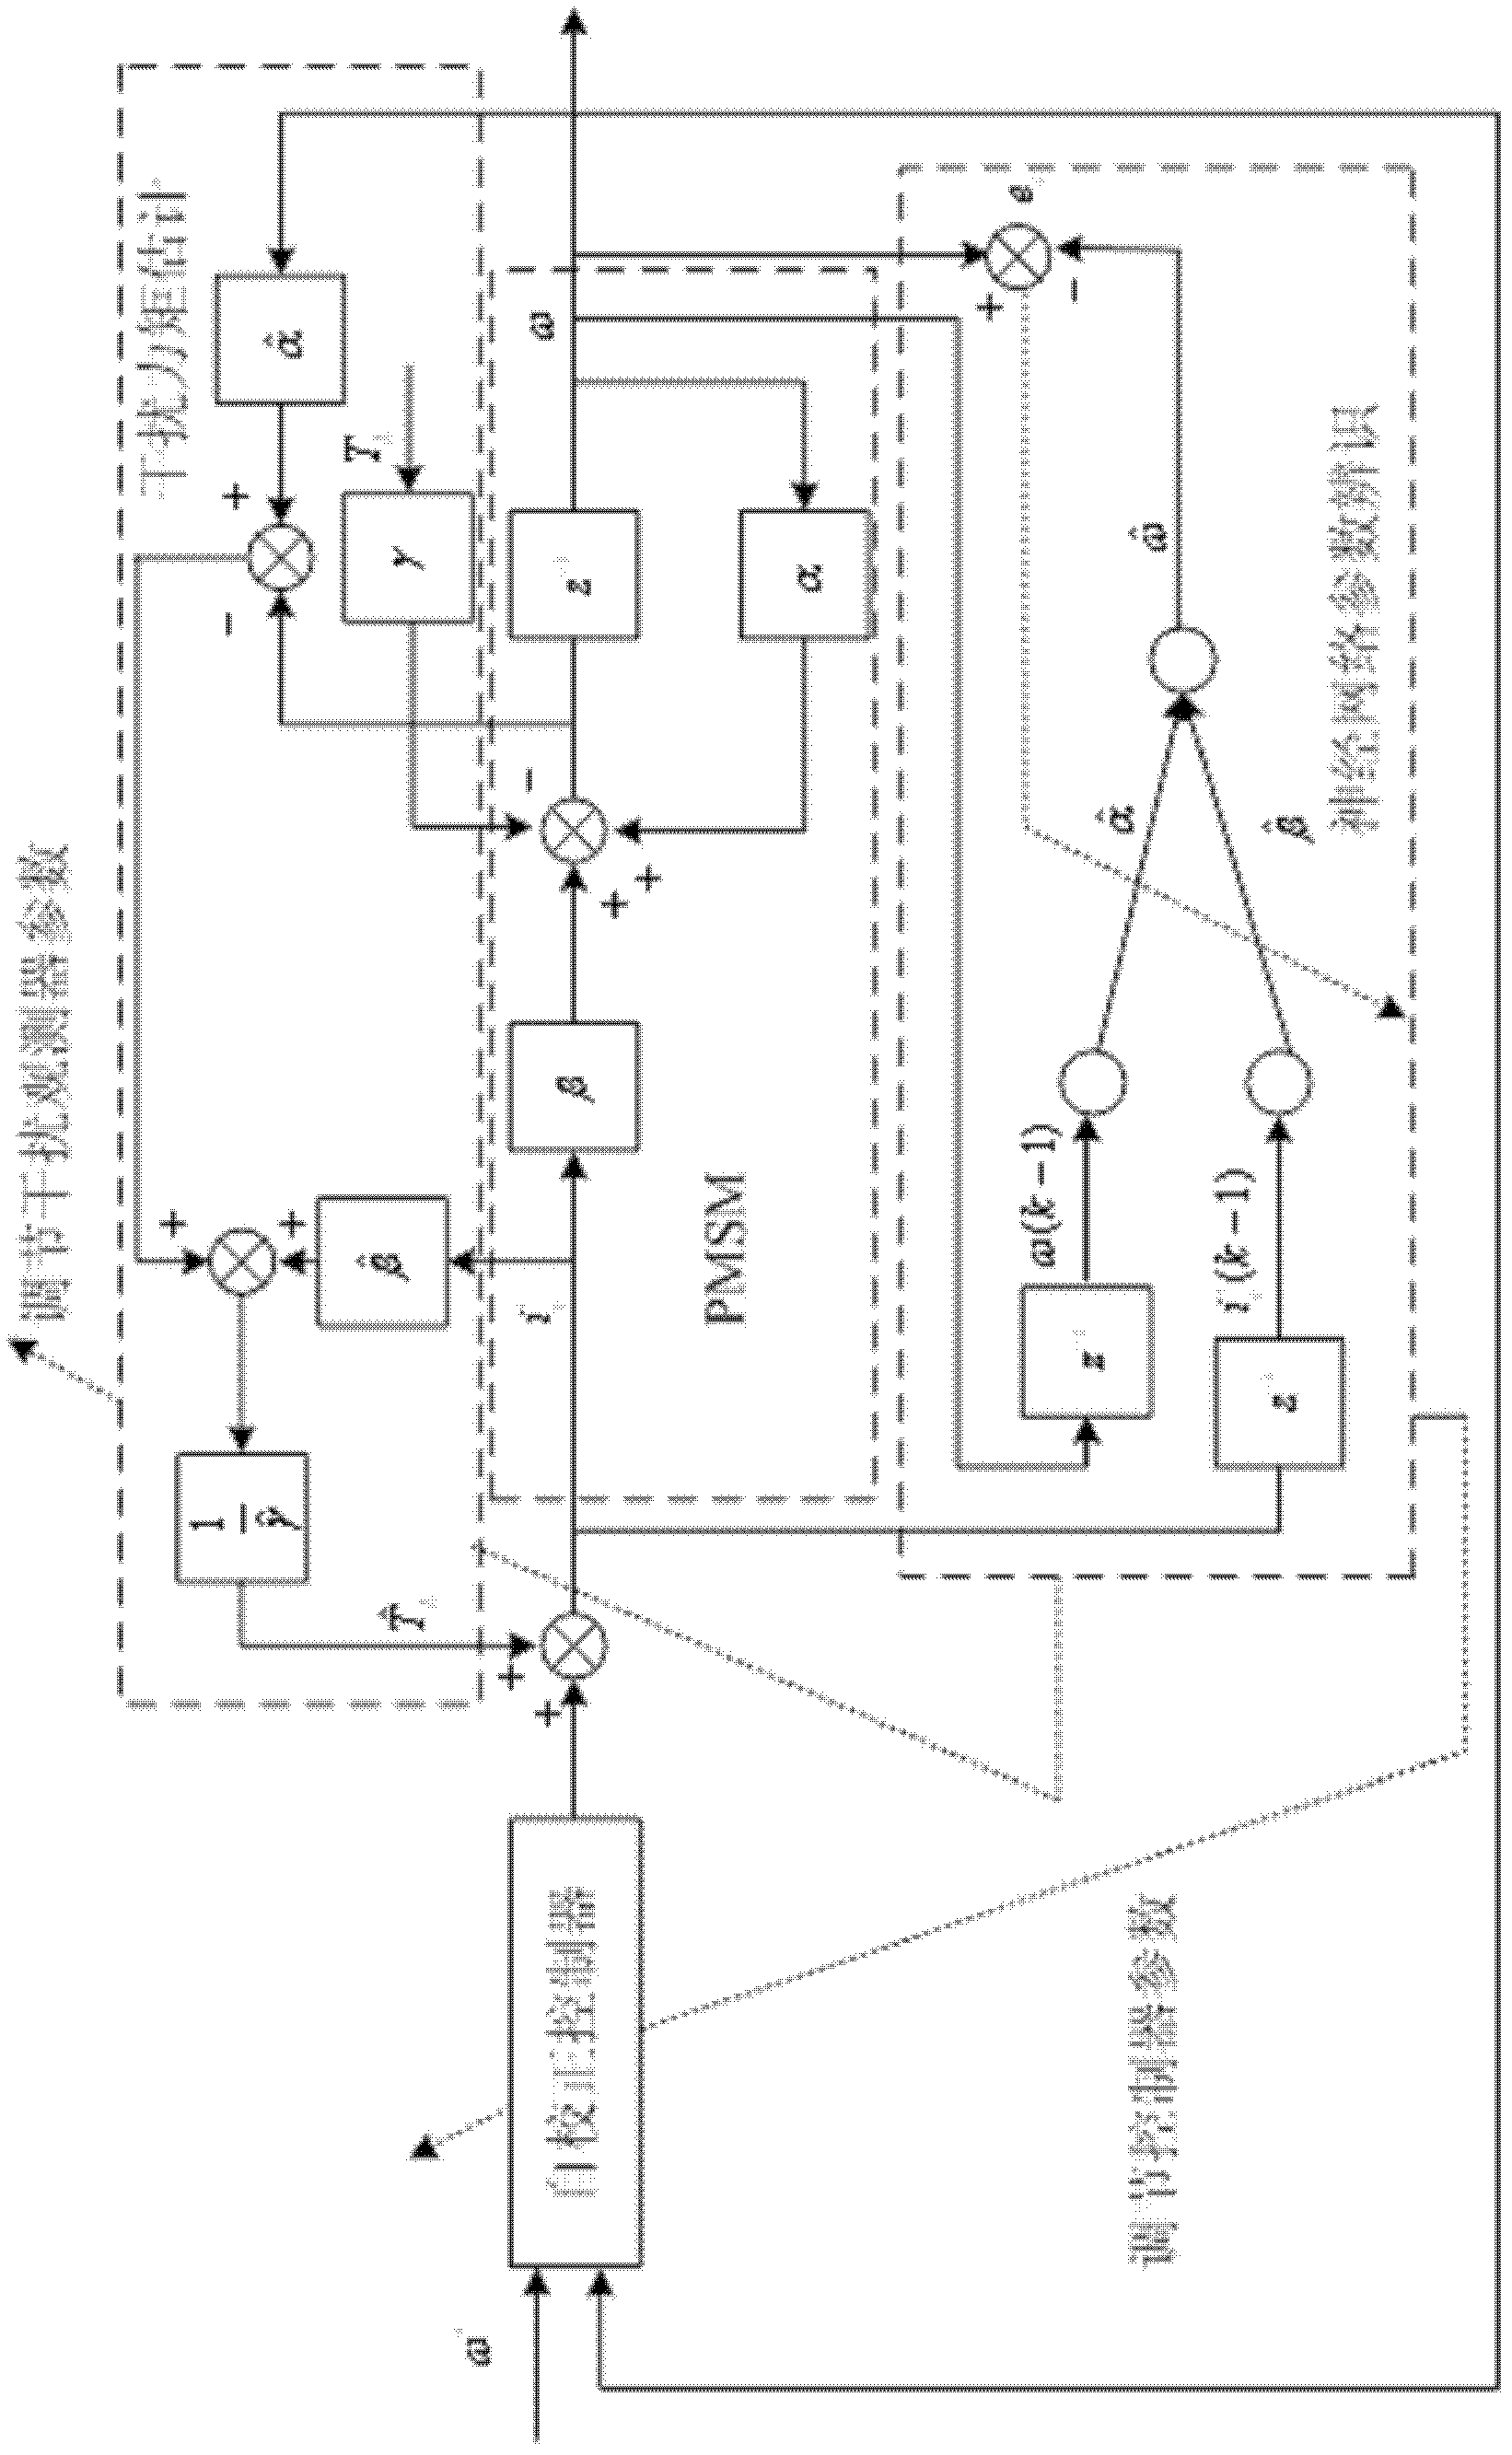 Neural-network self-correcting control method of permanent magnet synchronous motor speed loop